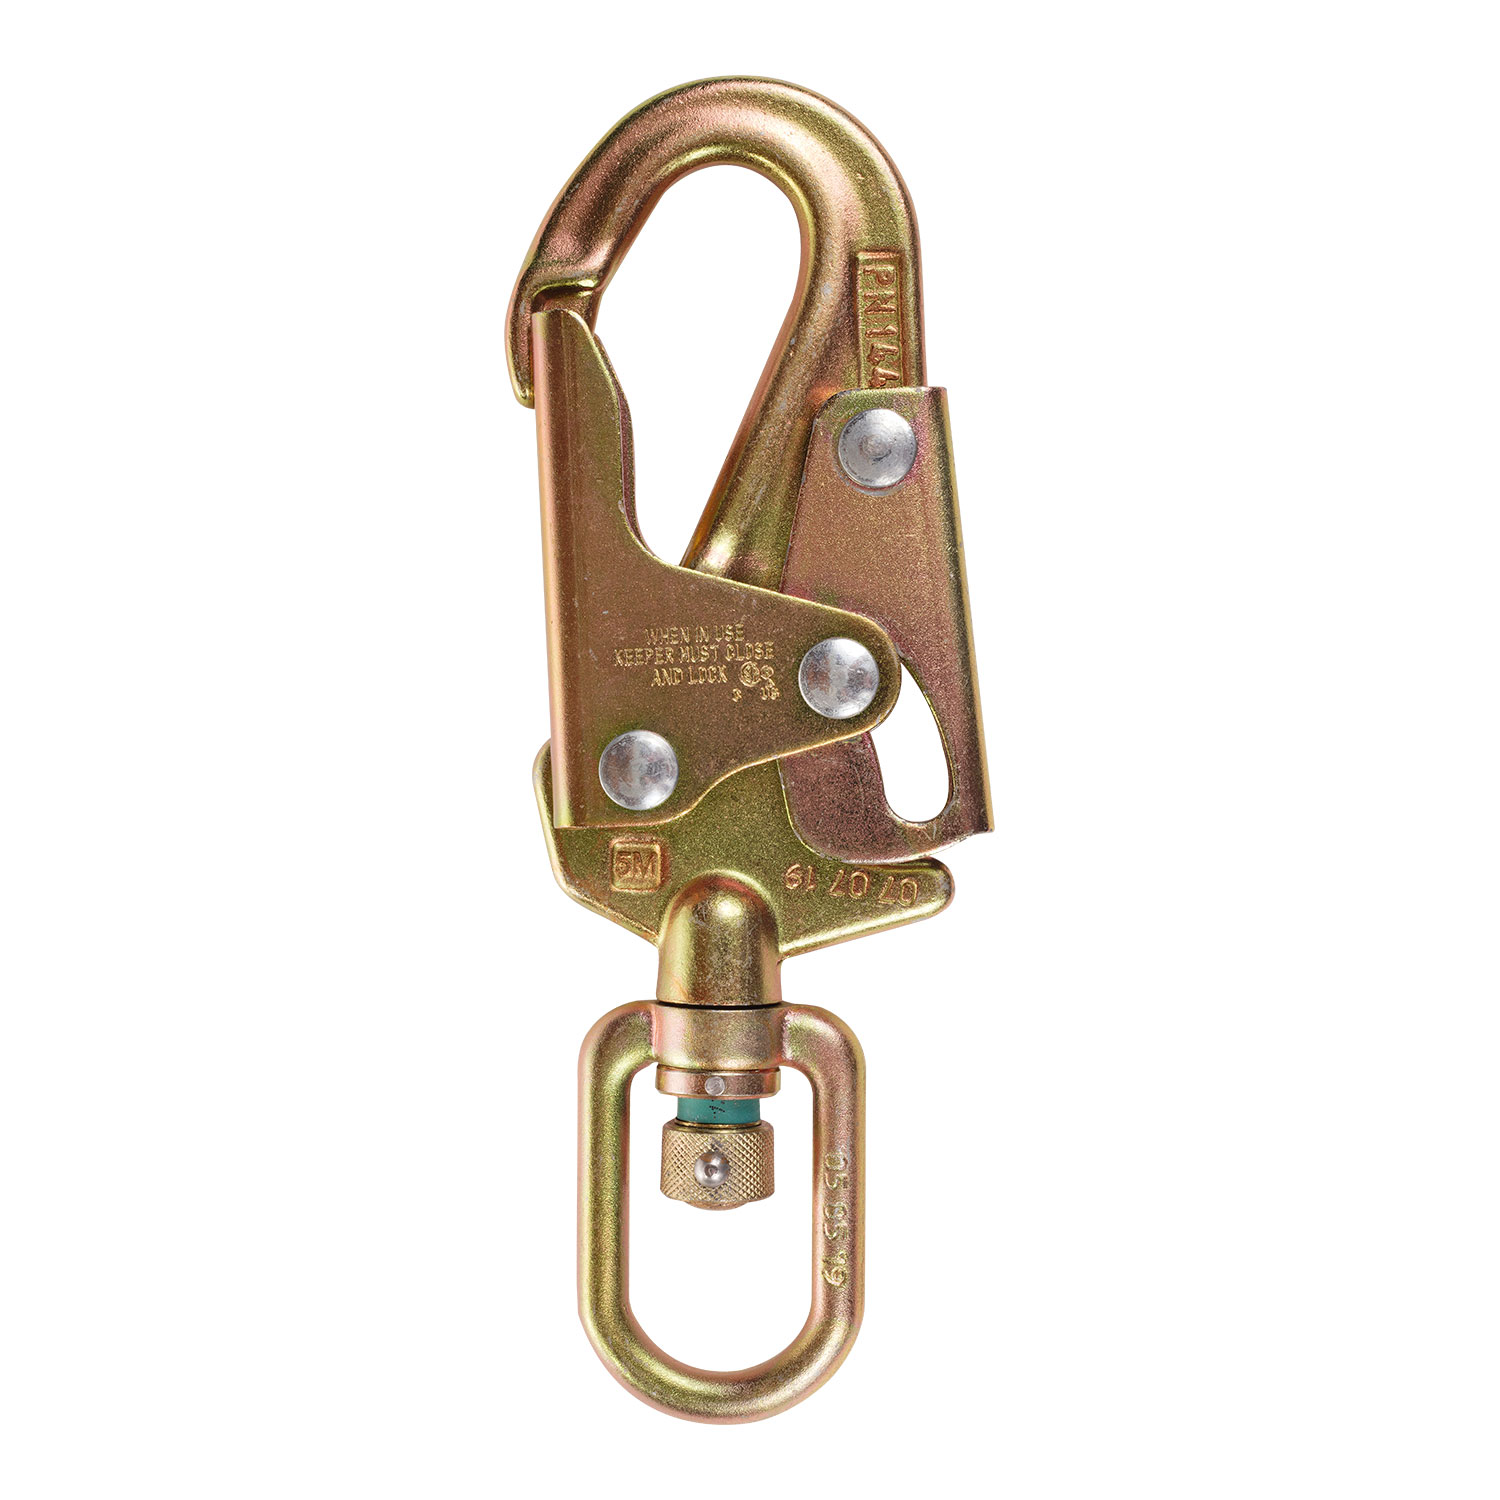 KStrong® Steel Swivel Snap hook with load indicator (ANSI) - KStrong